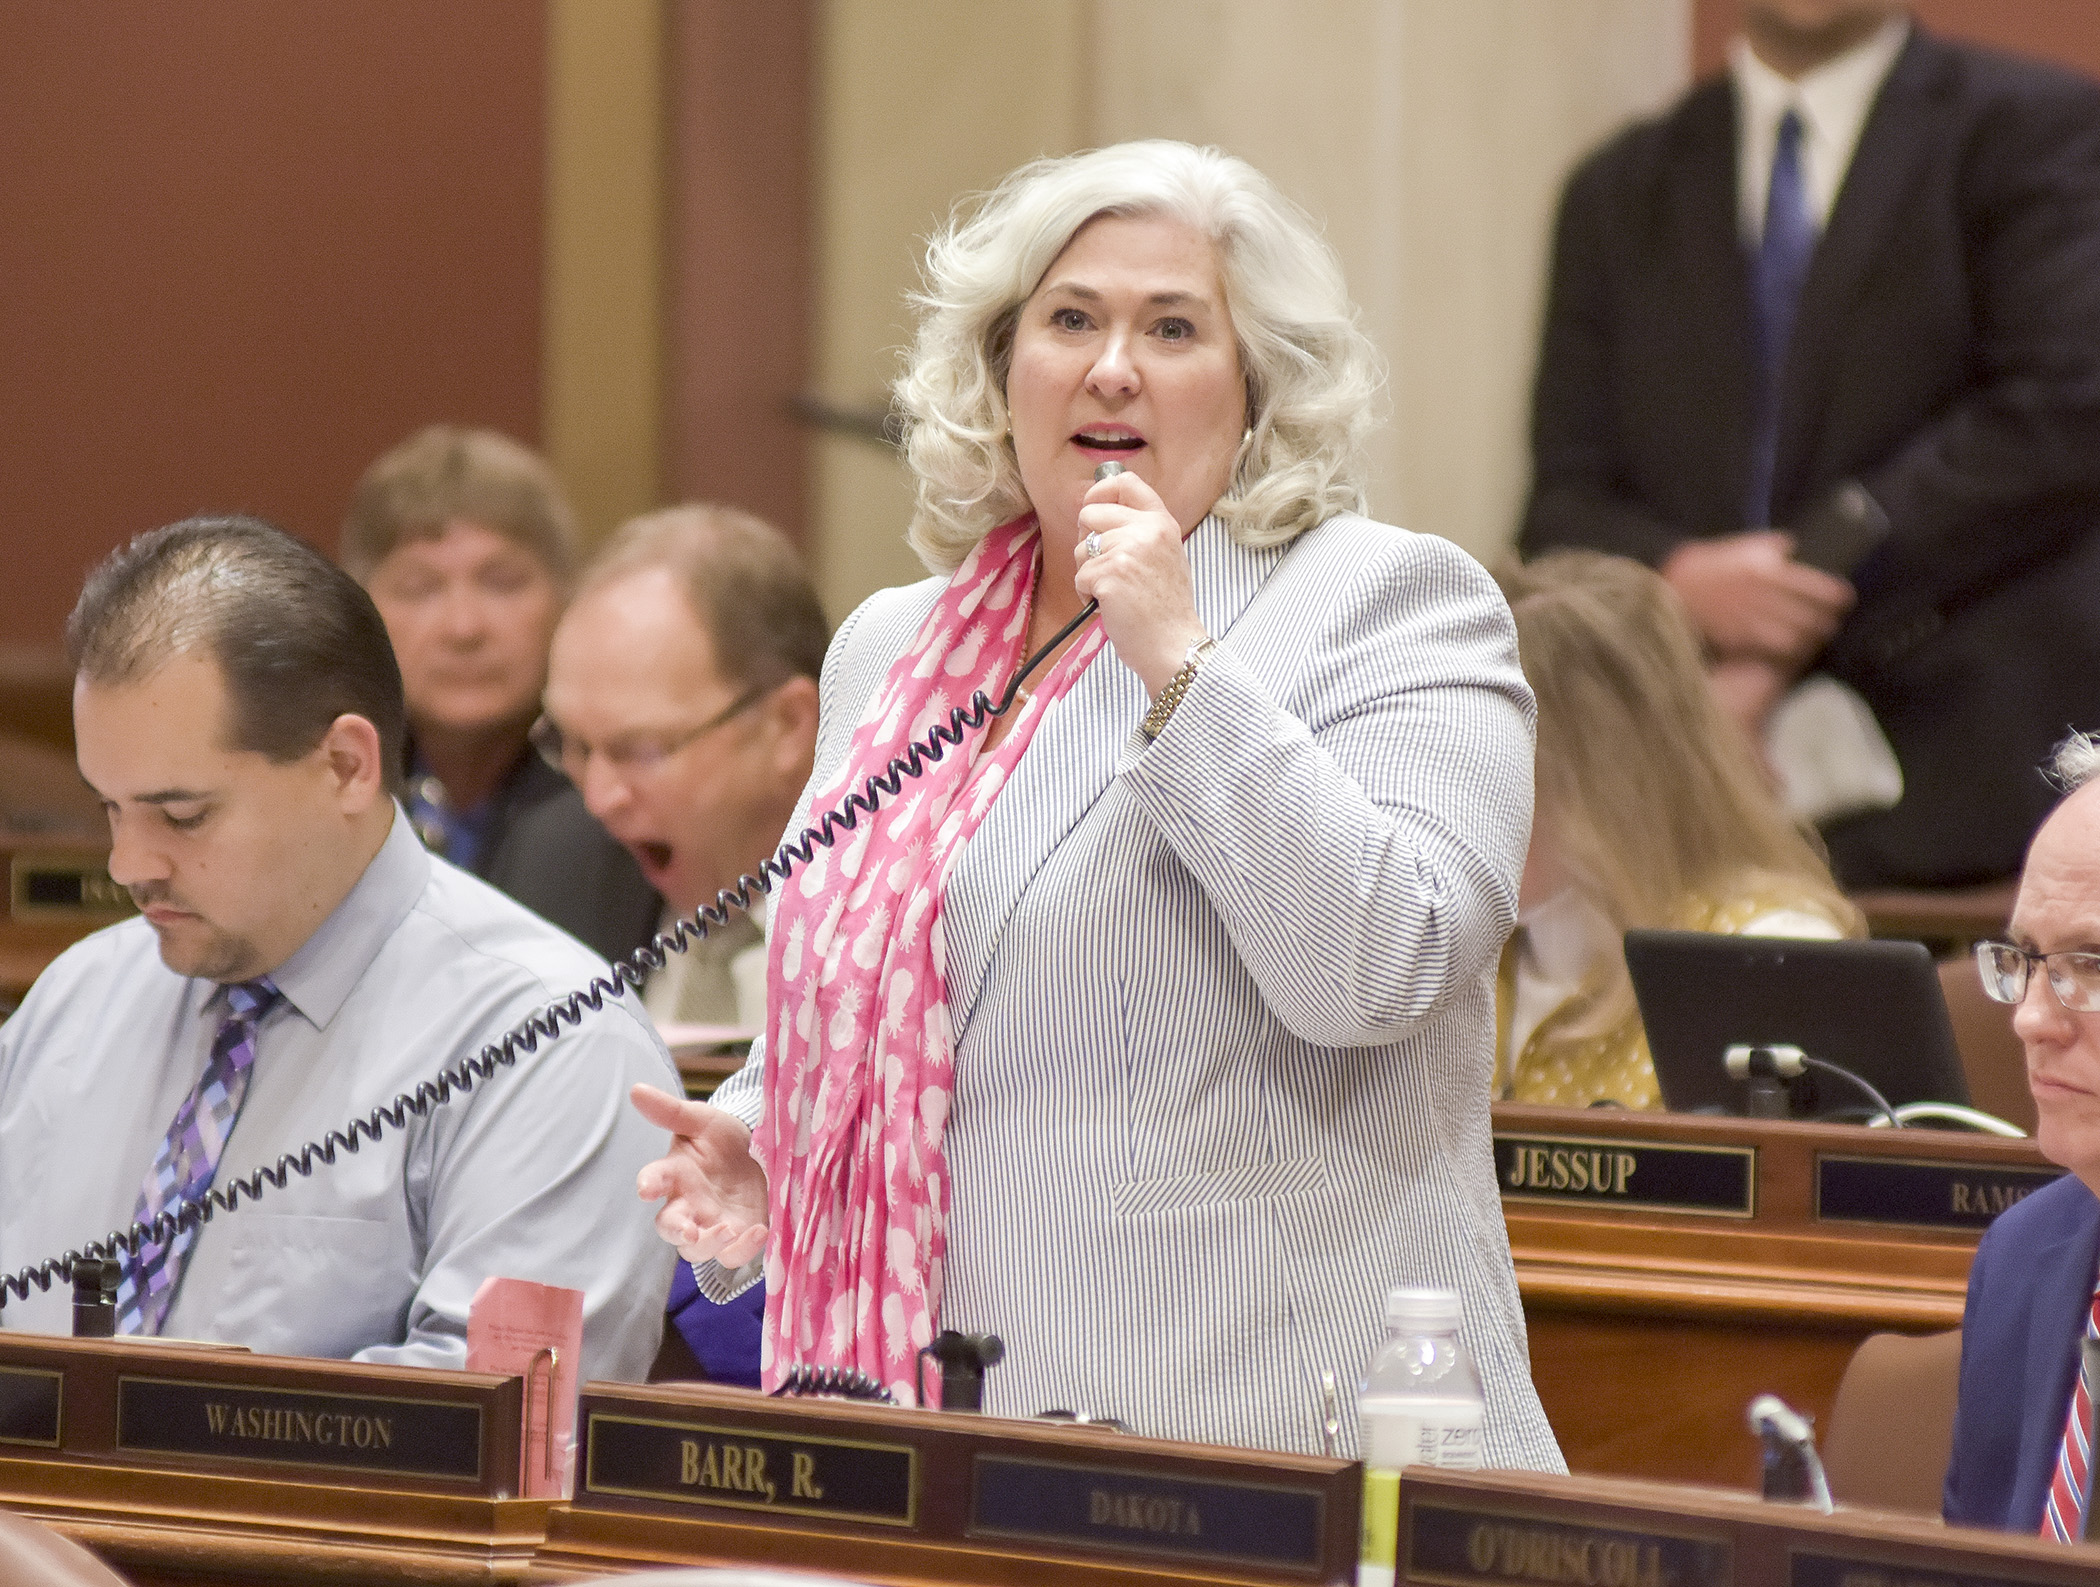 Rep. Kelly Fenton presents the omnibus elections bill on the House Floor May 21. Photo by Andrew VonBank